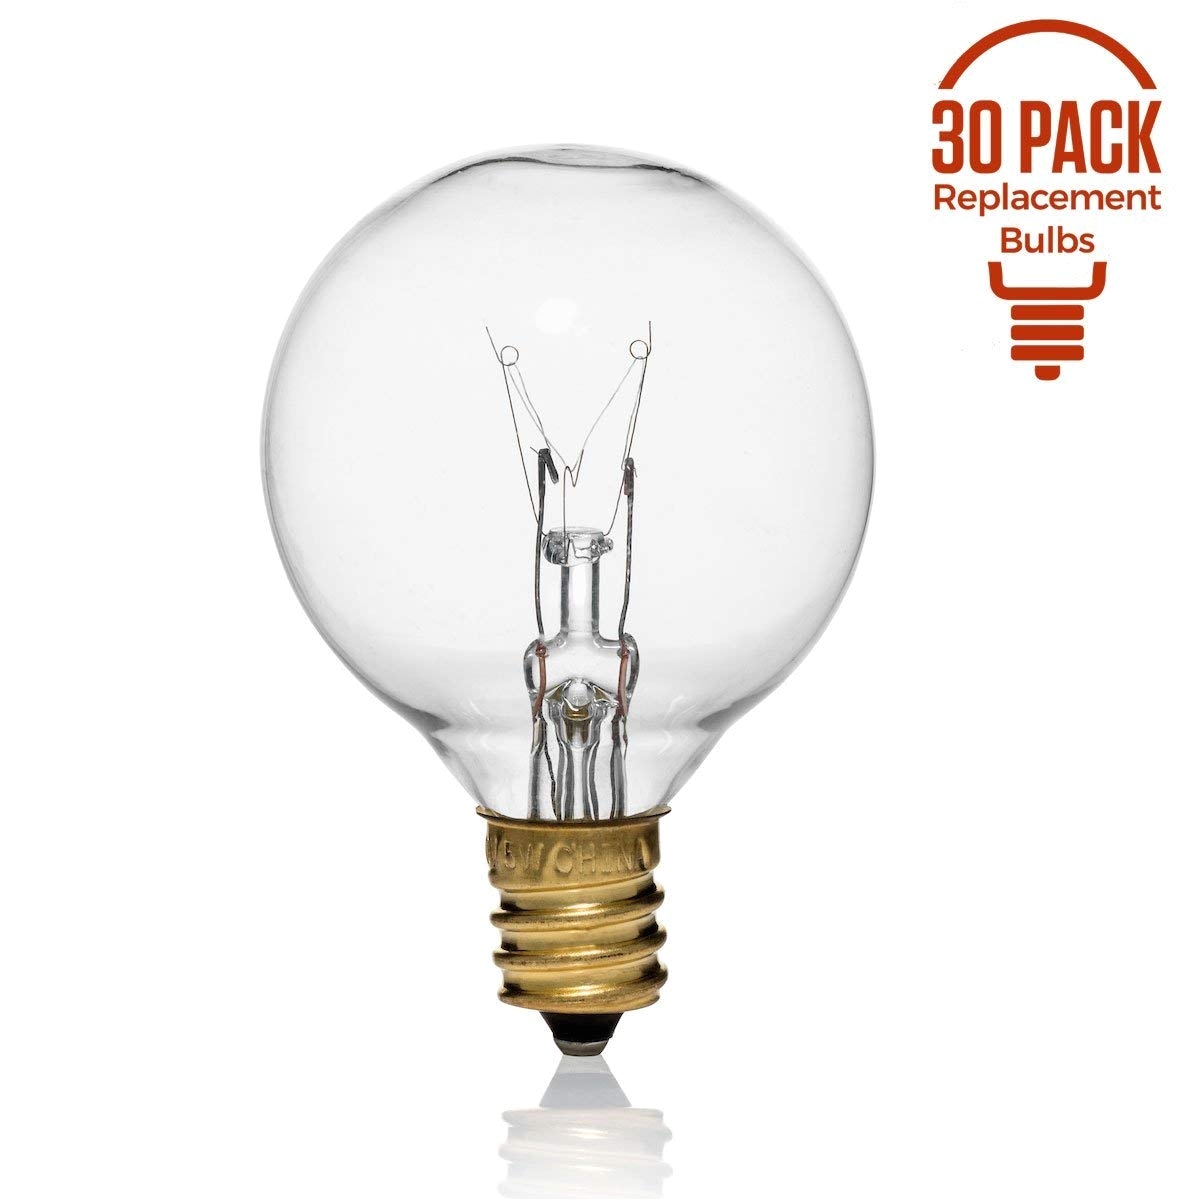 30 pack of g40 replacement bulbs 5 watt g40 globe bulbs for string lights candelabra screw base fits e12 and c7 sockets indoor outdoor use